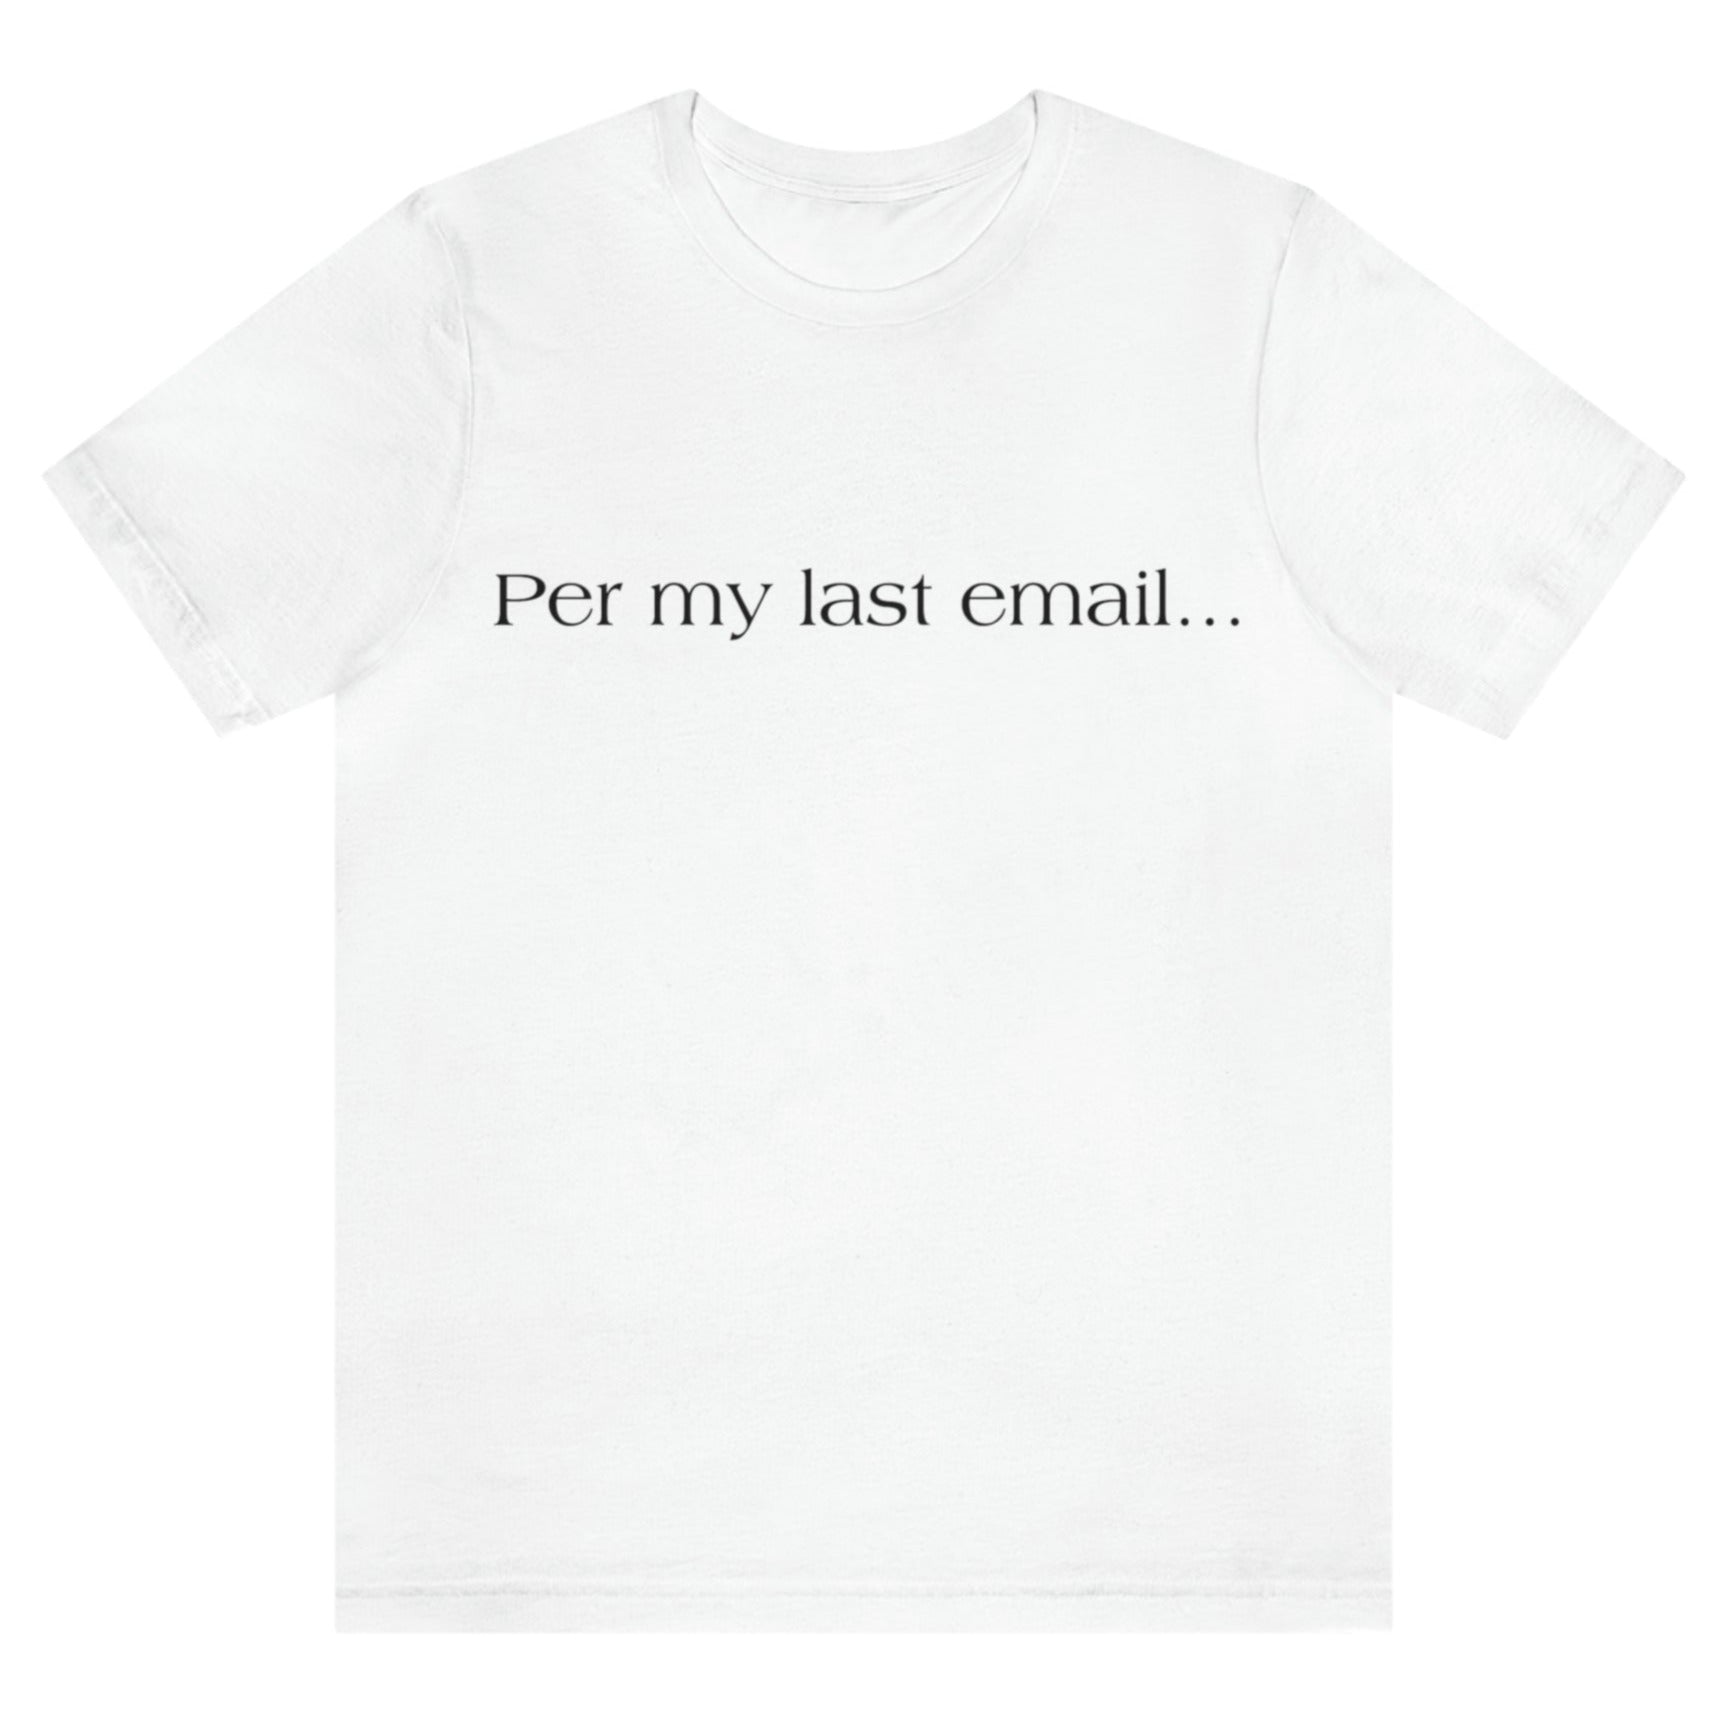 per-my-last-email-white-t-shirt-office-humor